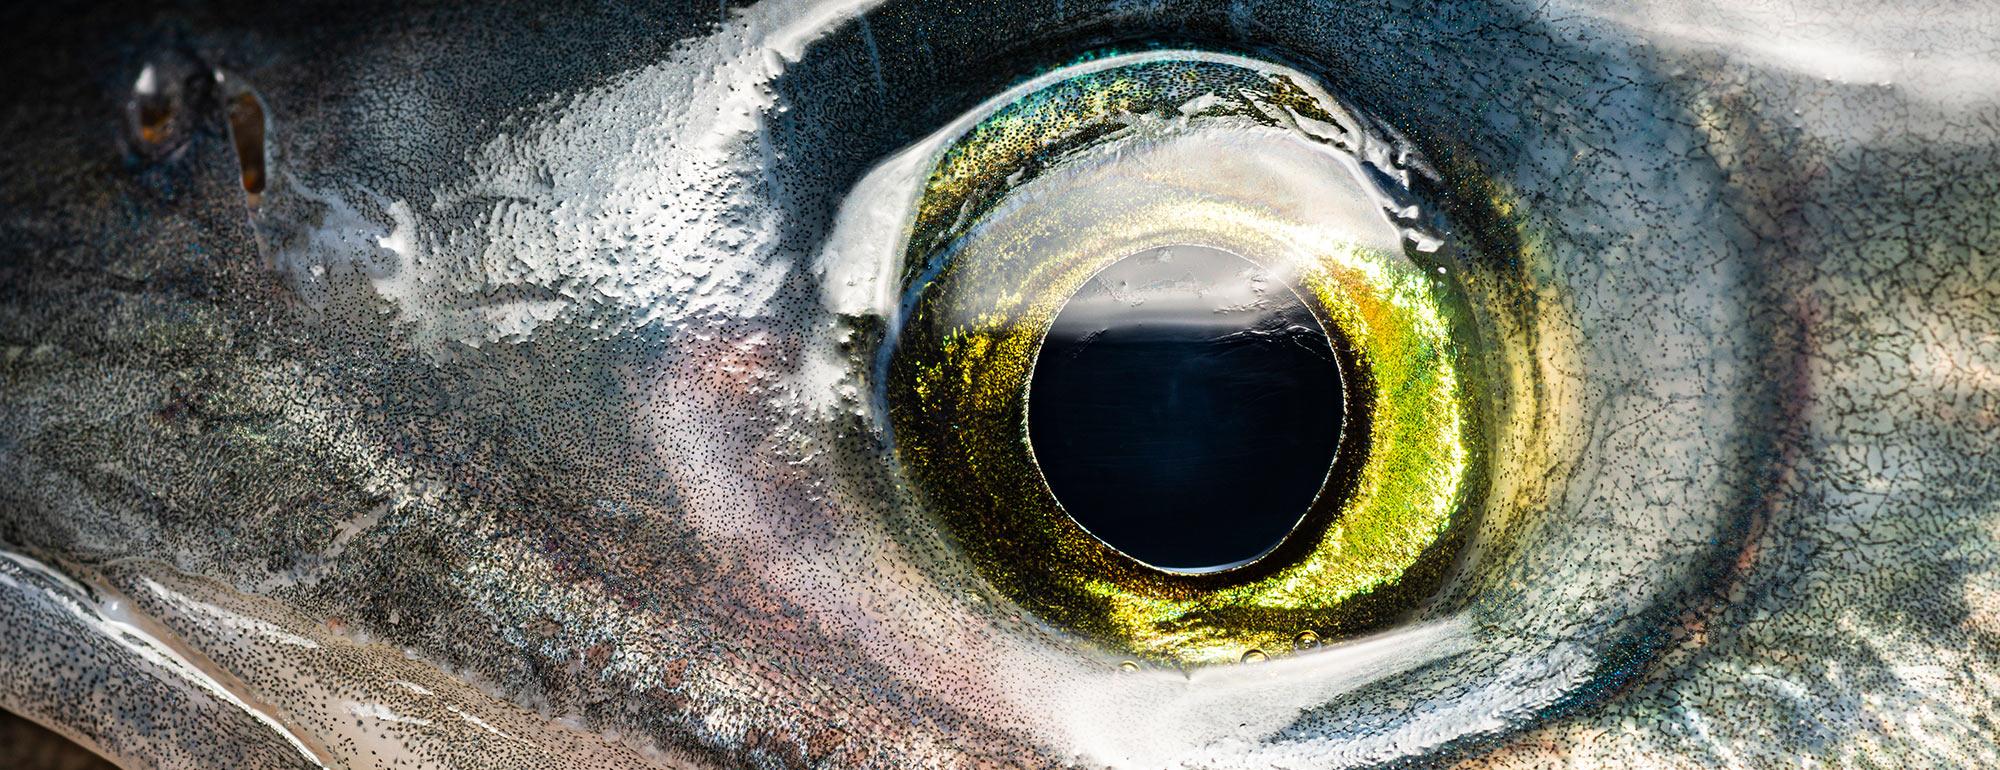 A close up of a fishes eye